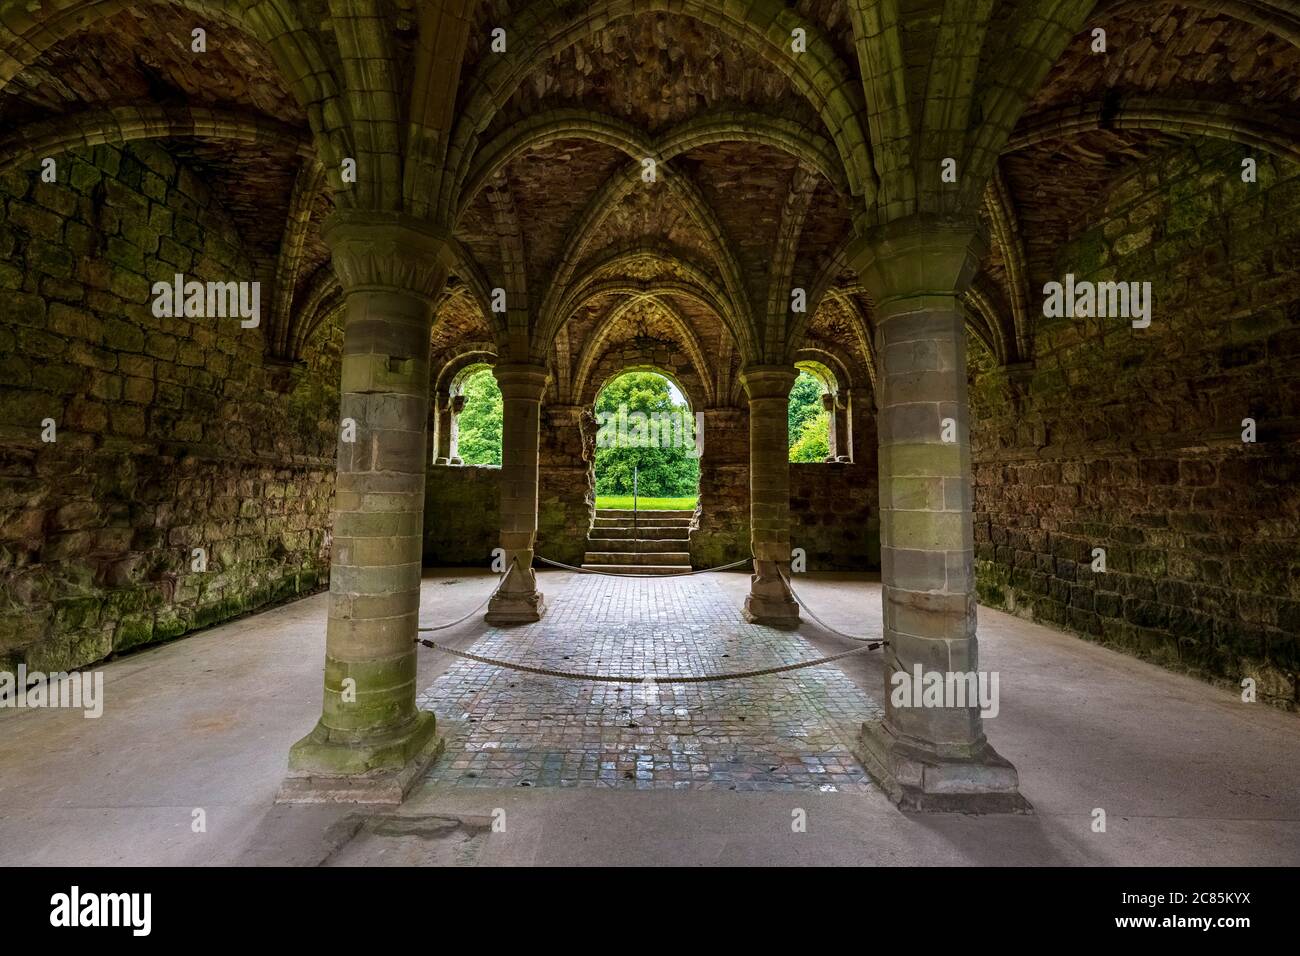 The tiled floor and vaulted ceiling of the Chapter House at Buildwas Abbey, Shropshire, England Stock Photo